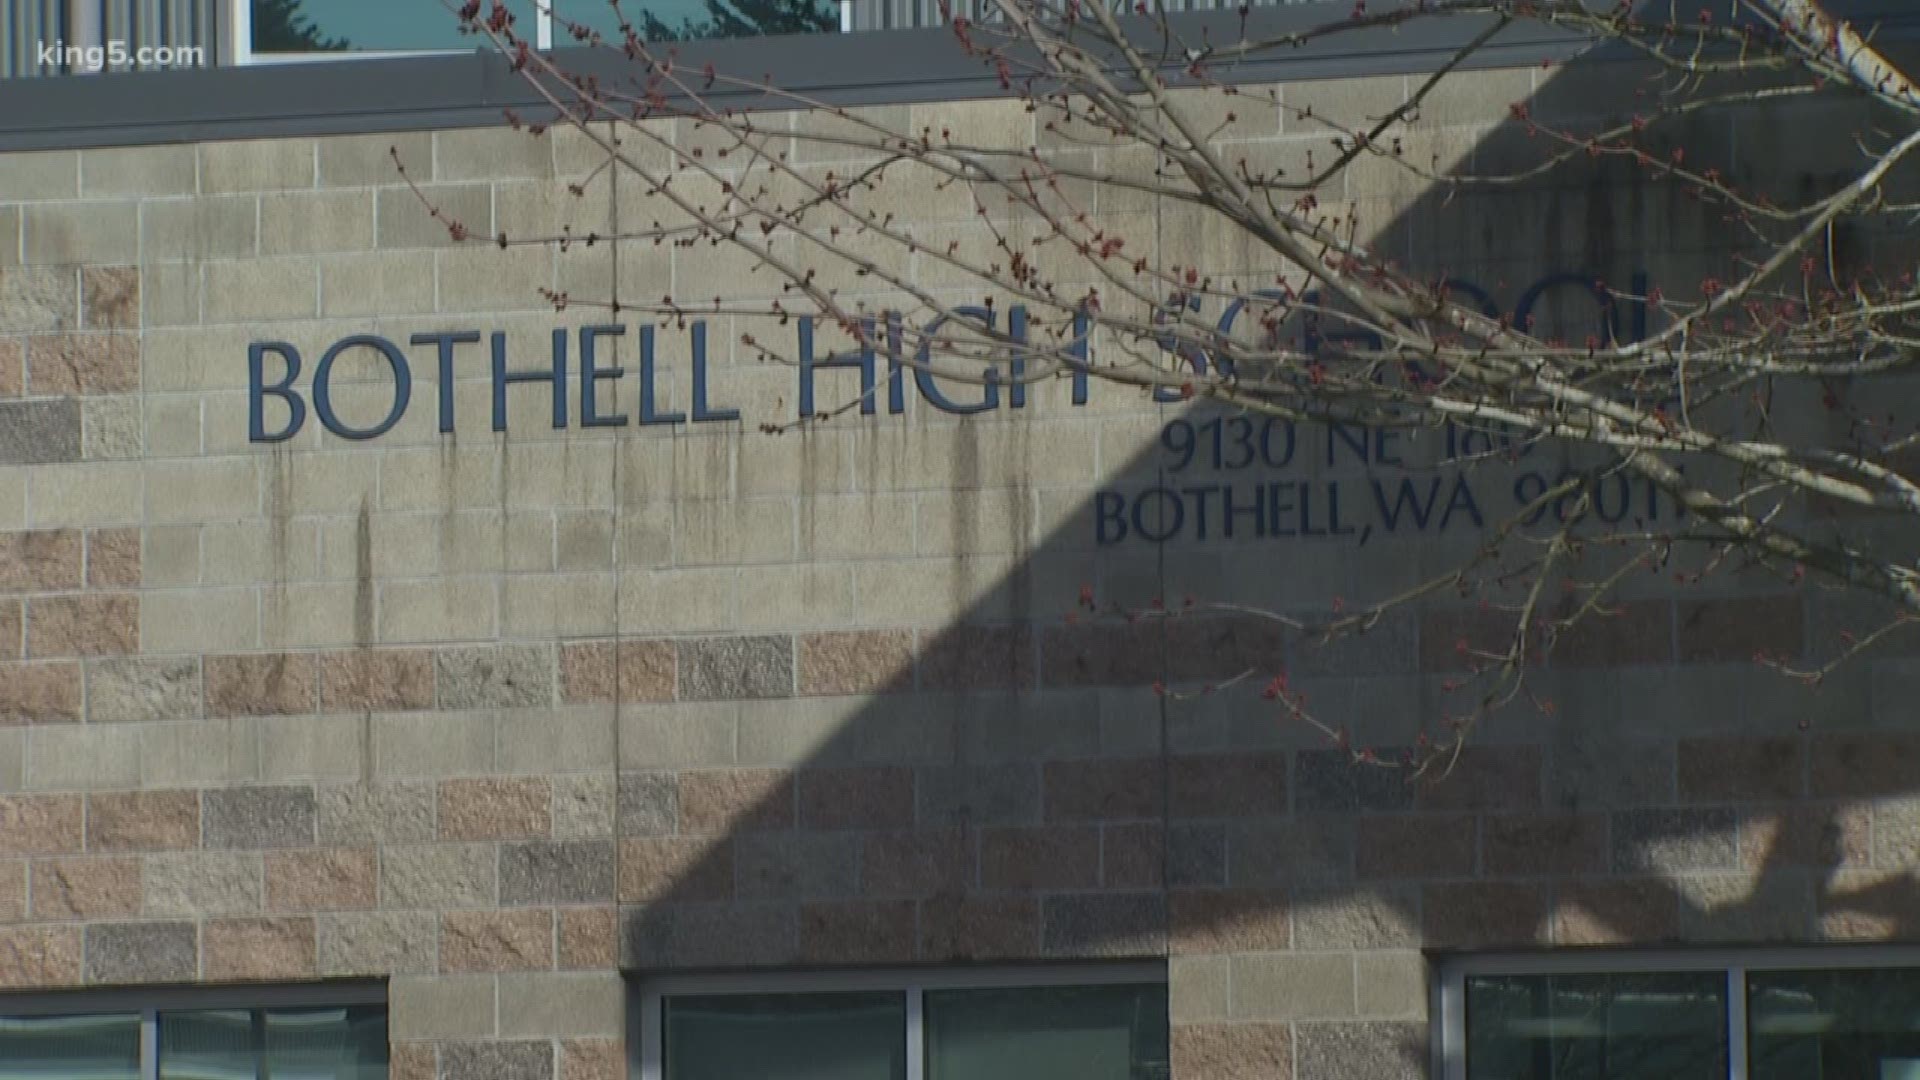 Bothell High School will be closed again on Friday, Feb. 28 out of an abundance of caution due to coronavirus (COVID-19) concerns.